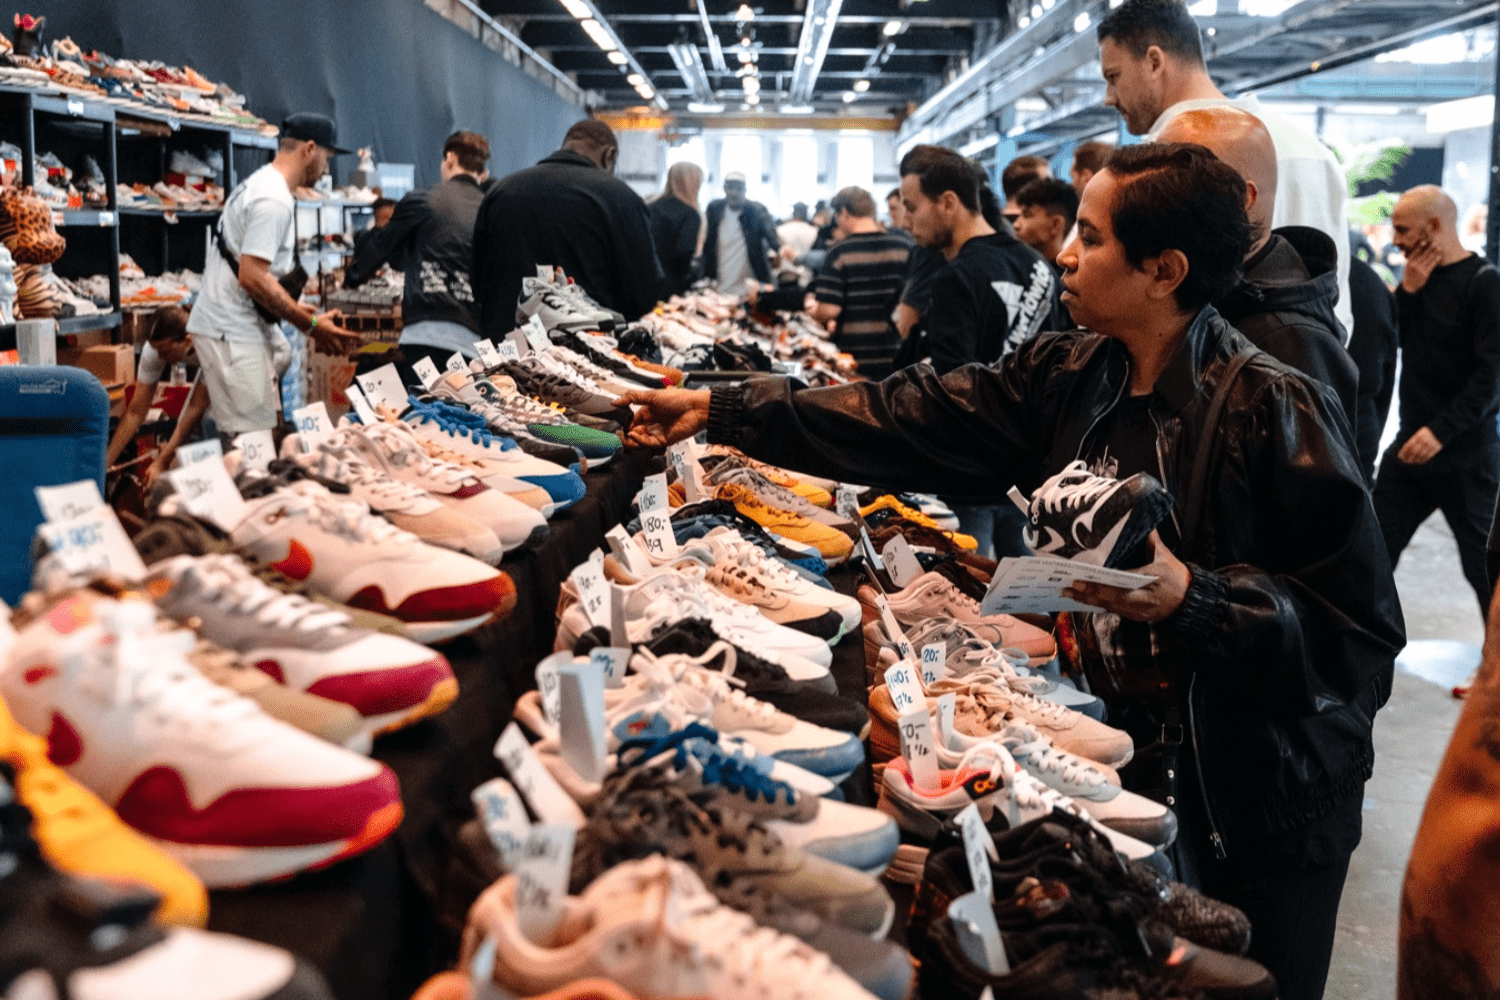 Get to know the Sellers at Sneakerness - Part 2